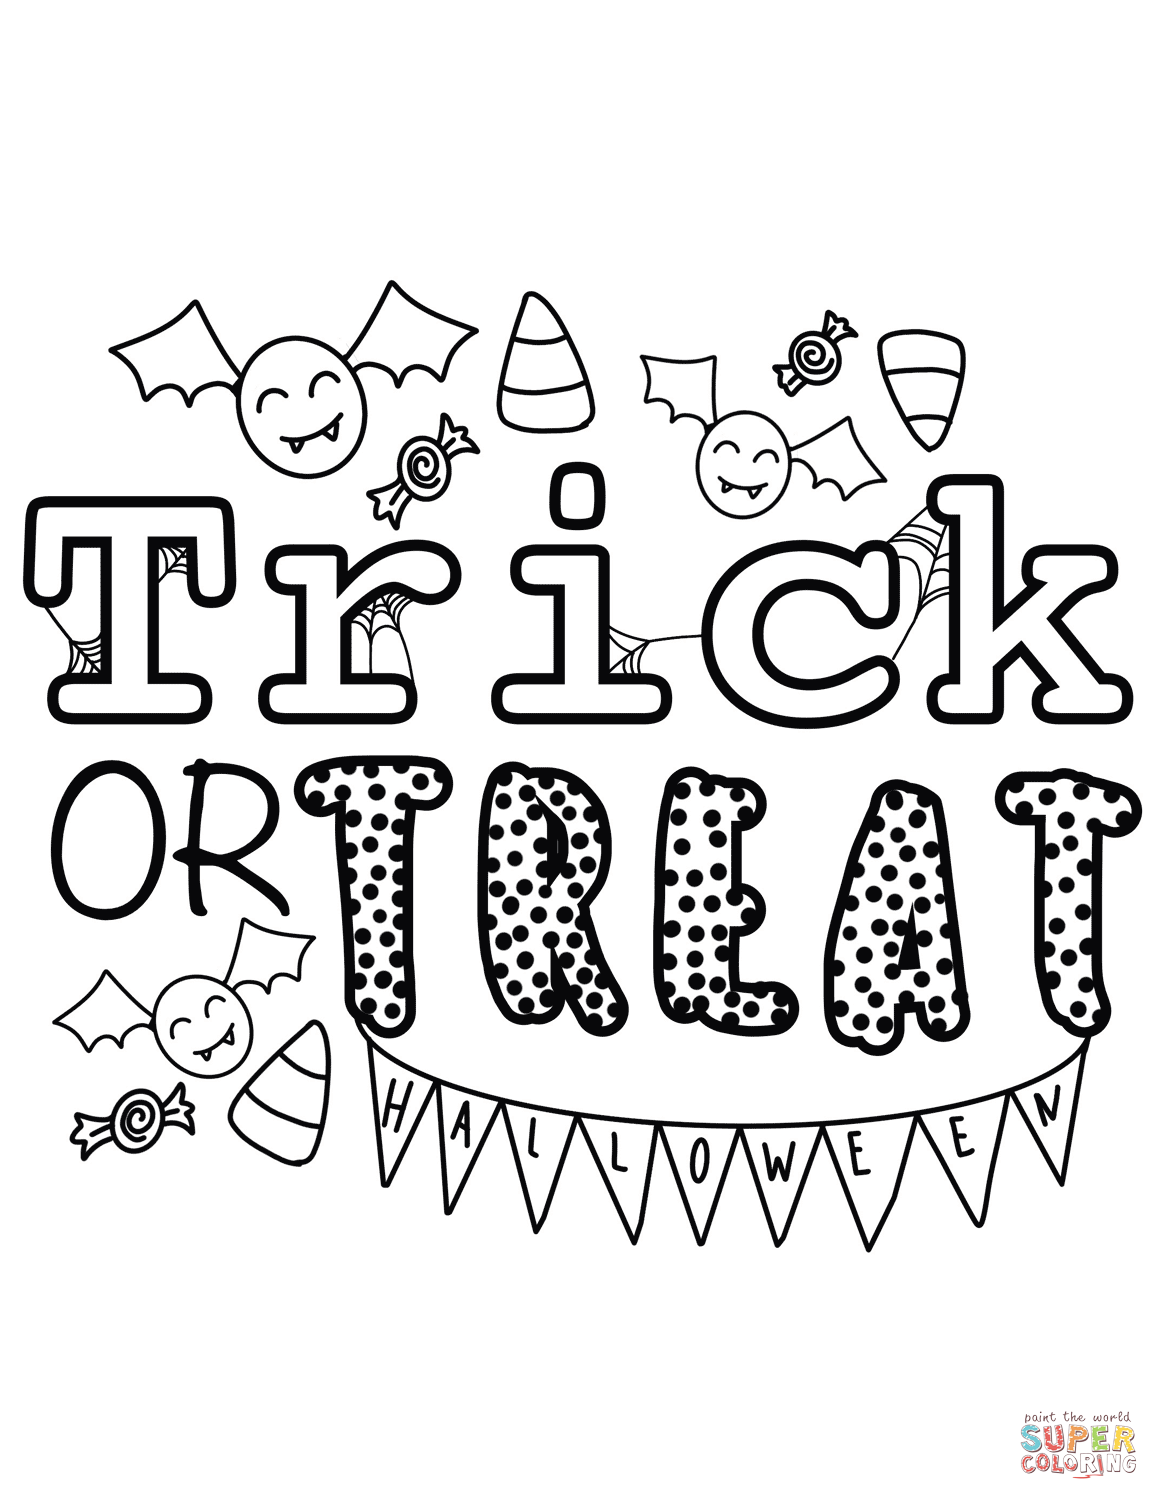 Trick-or-treating coloring page | Free Printable Coloring Pages